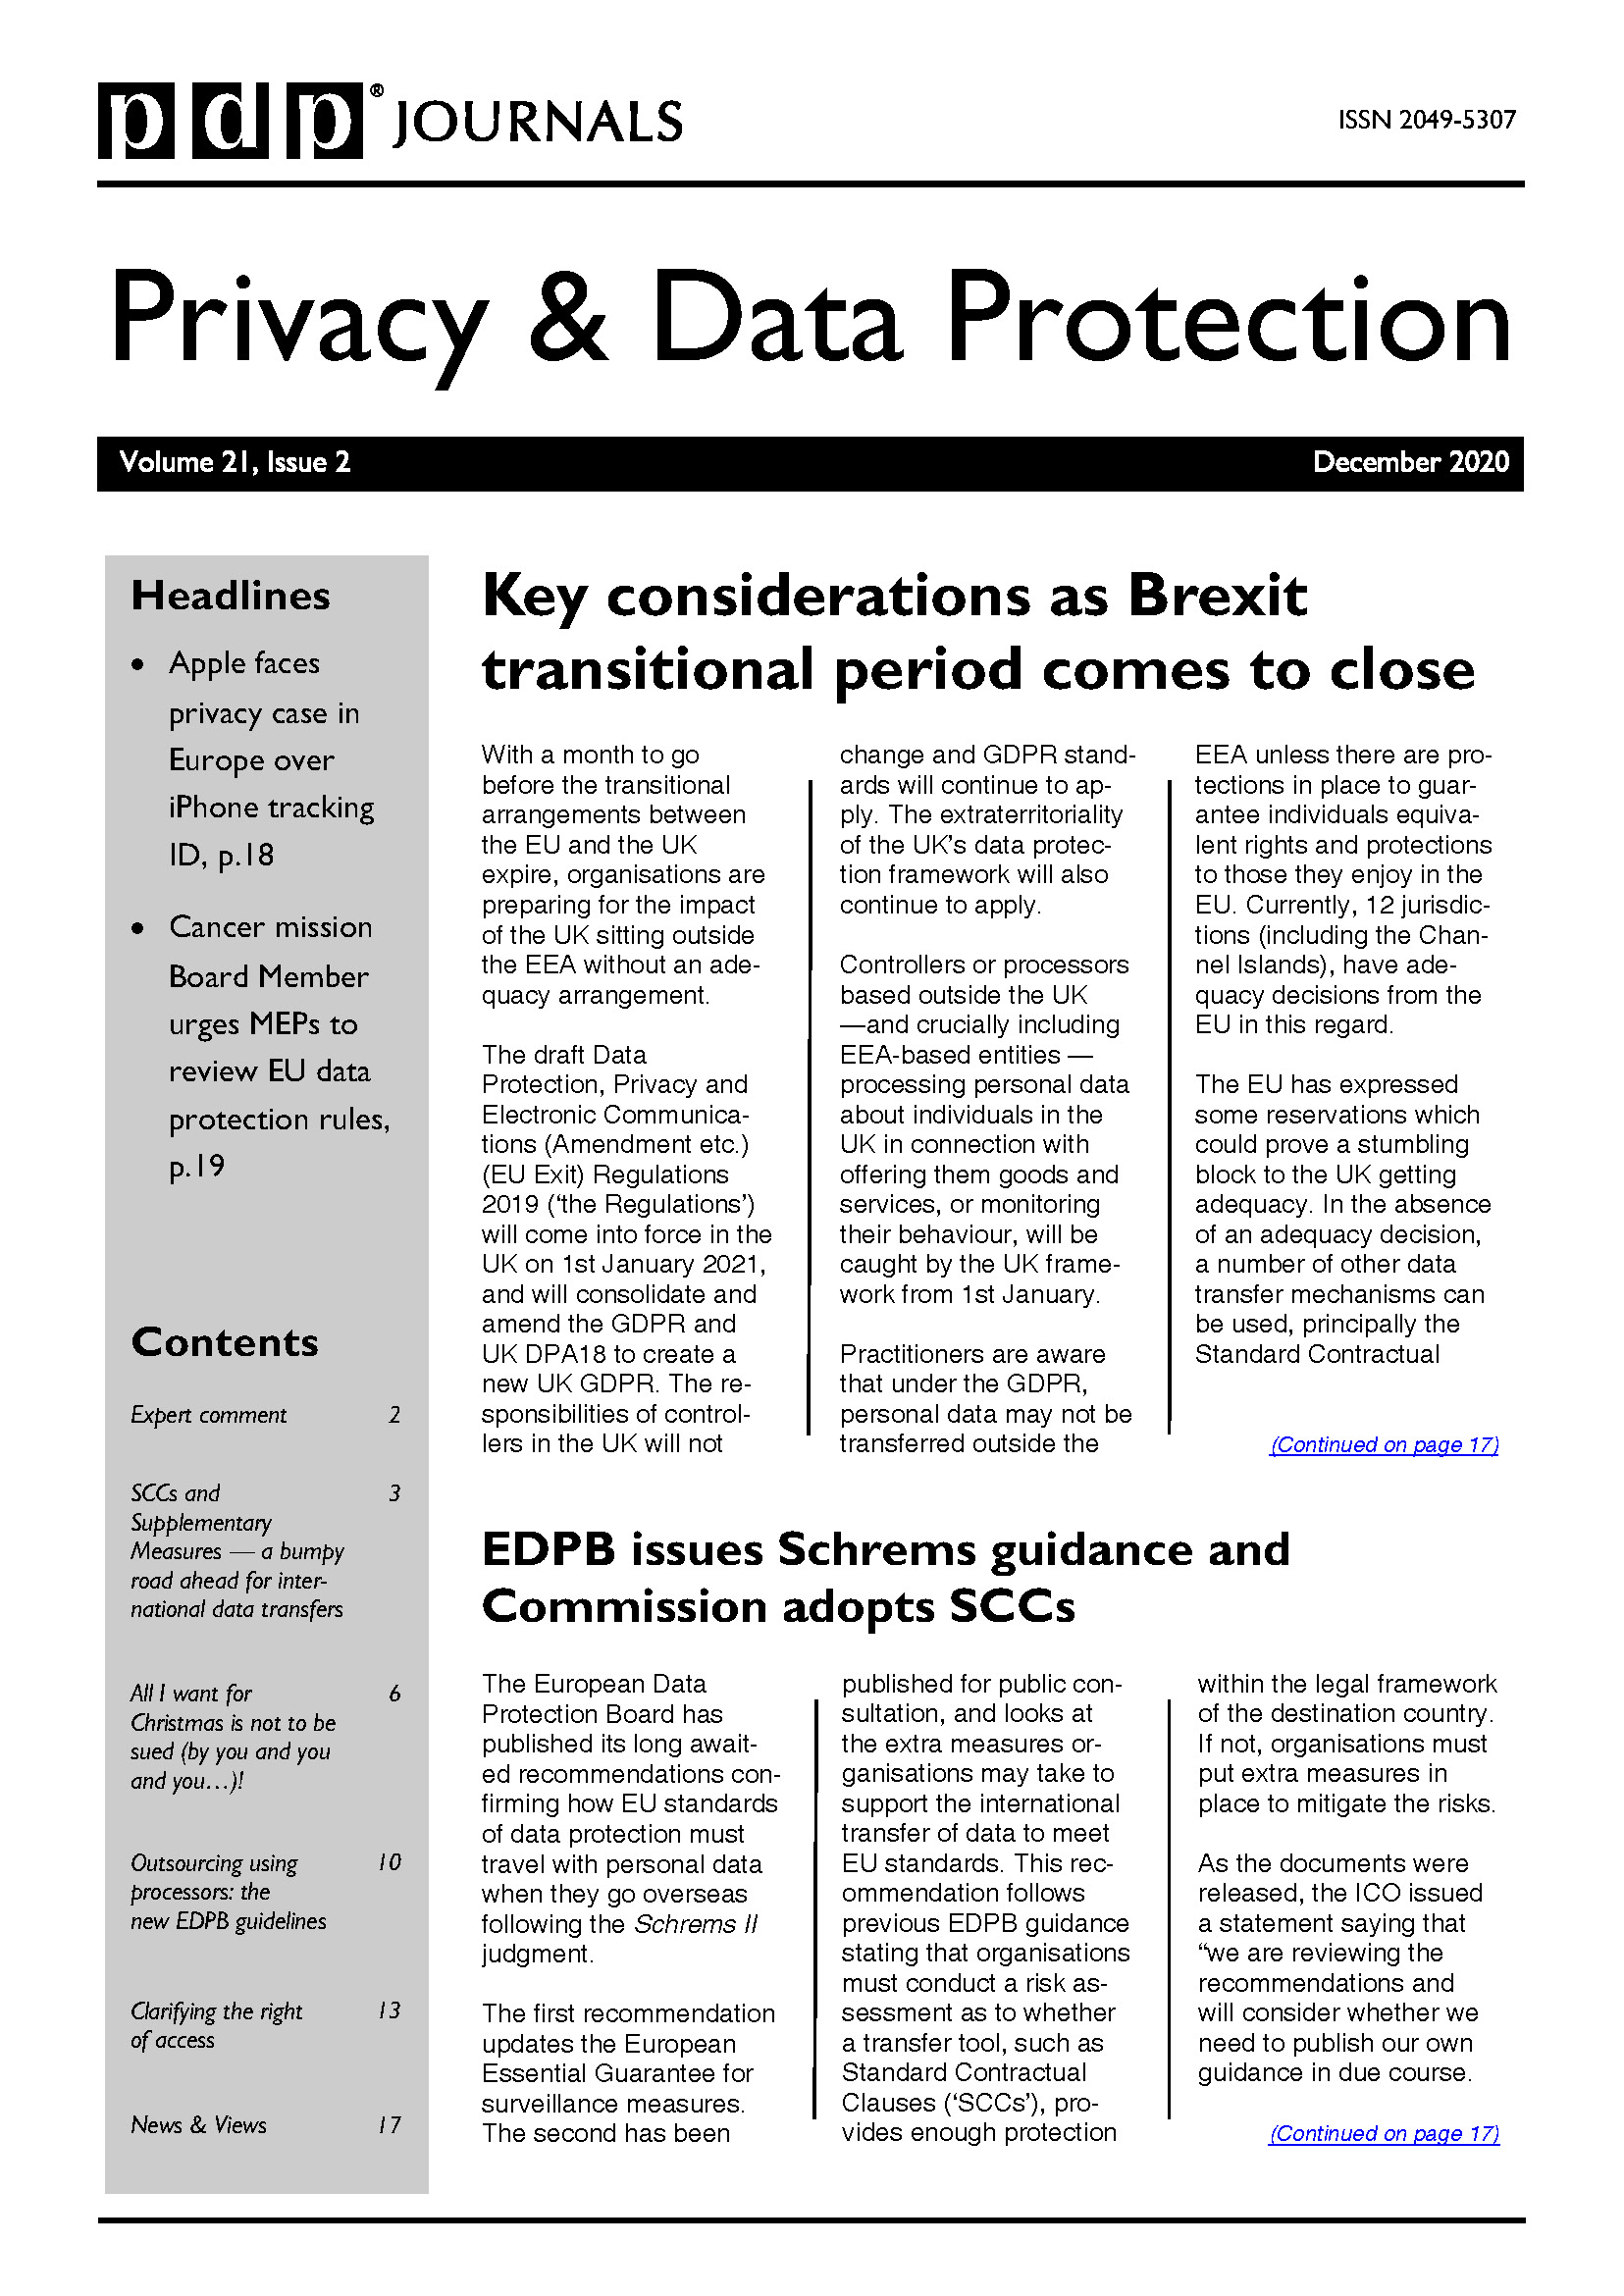 Privacy & Data Protection